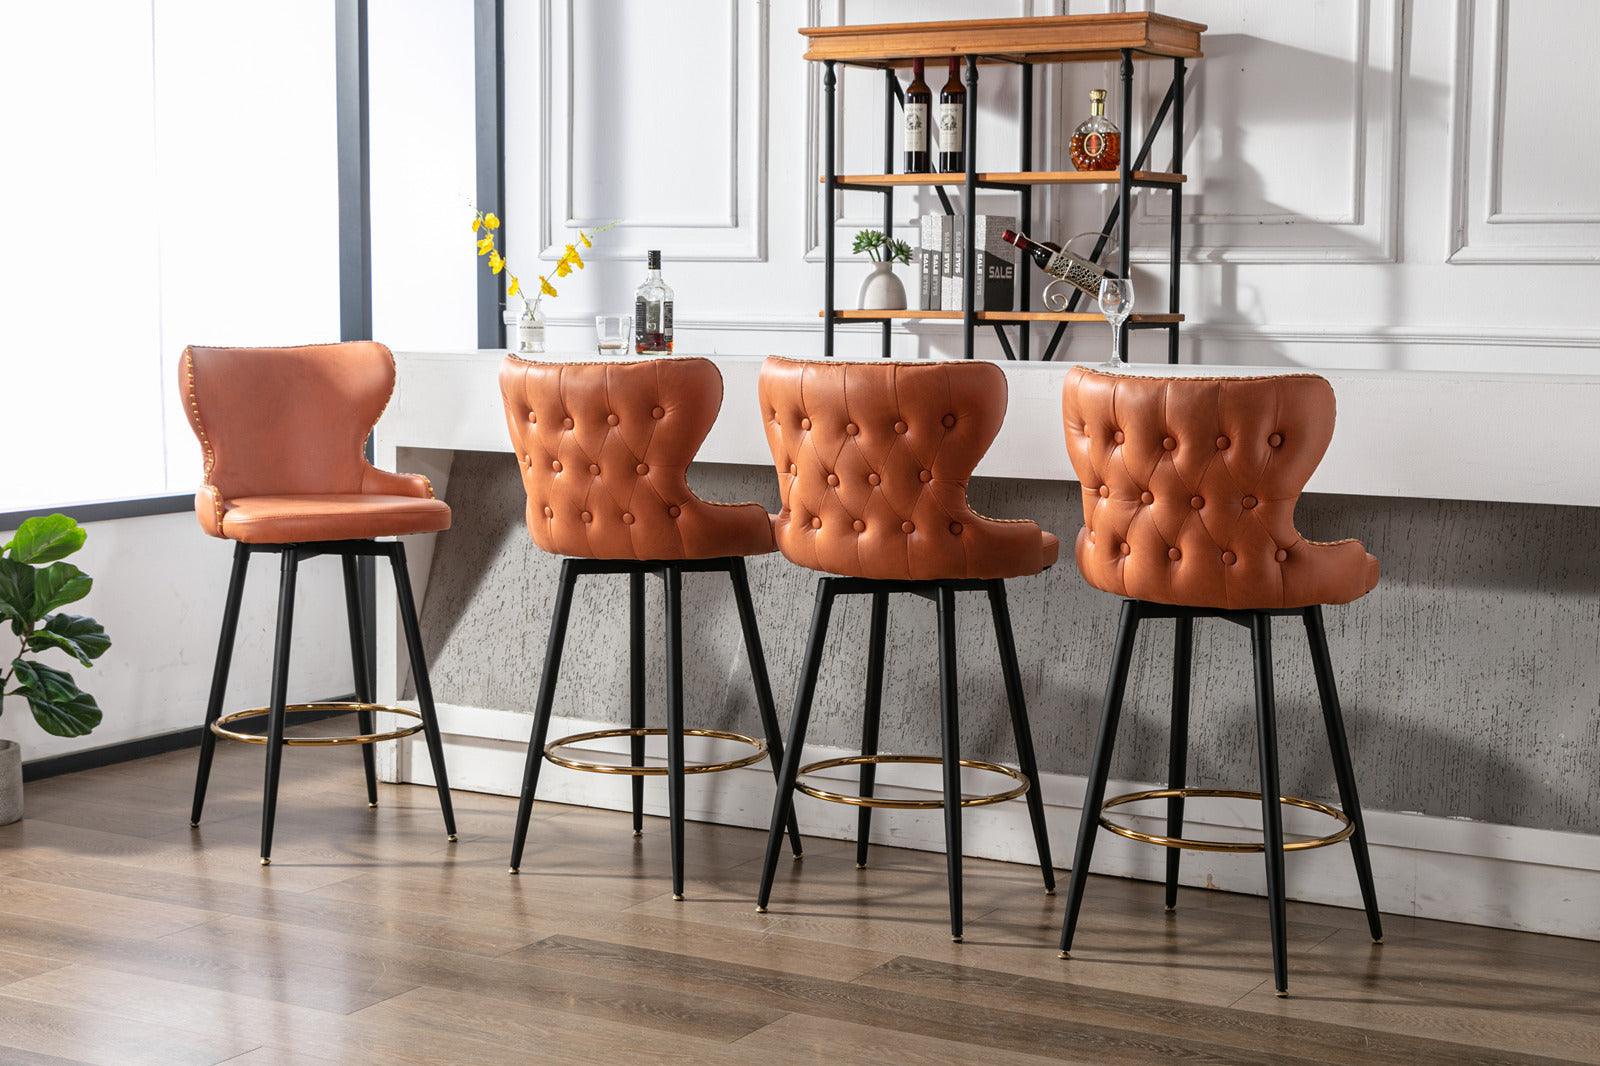 29" Modern Leathaire Fabric Bar Chairs, 180° Swivel Bar Stool Chair For Kitchen, Tufted Gold Nailhead Trim Gold Decoration Bar Stools With Metal Legs, Set Of 2 (Orange)